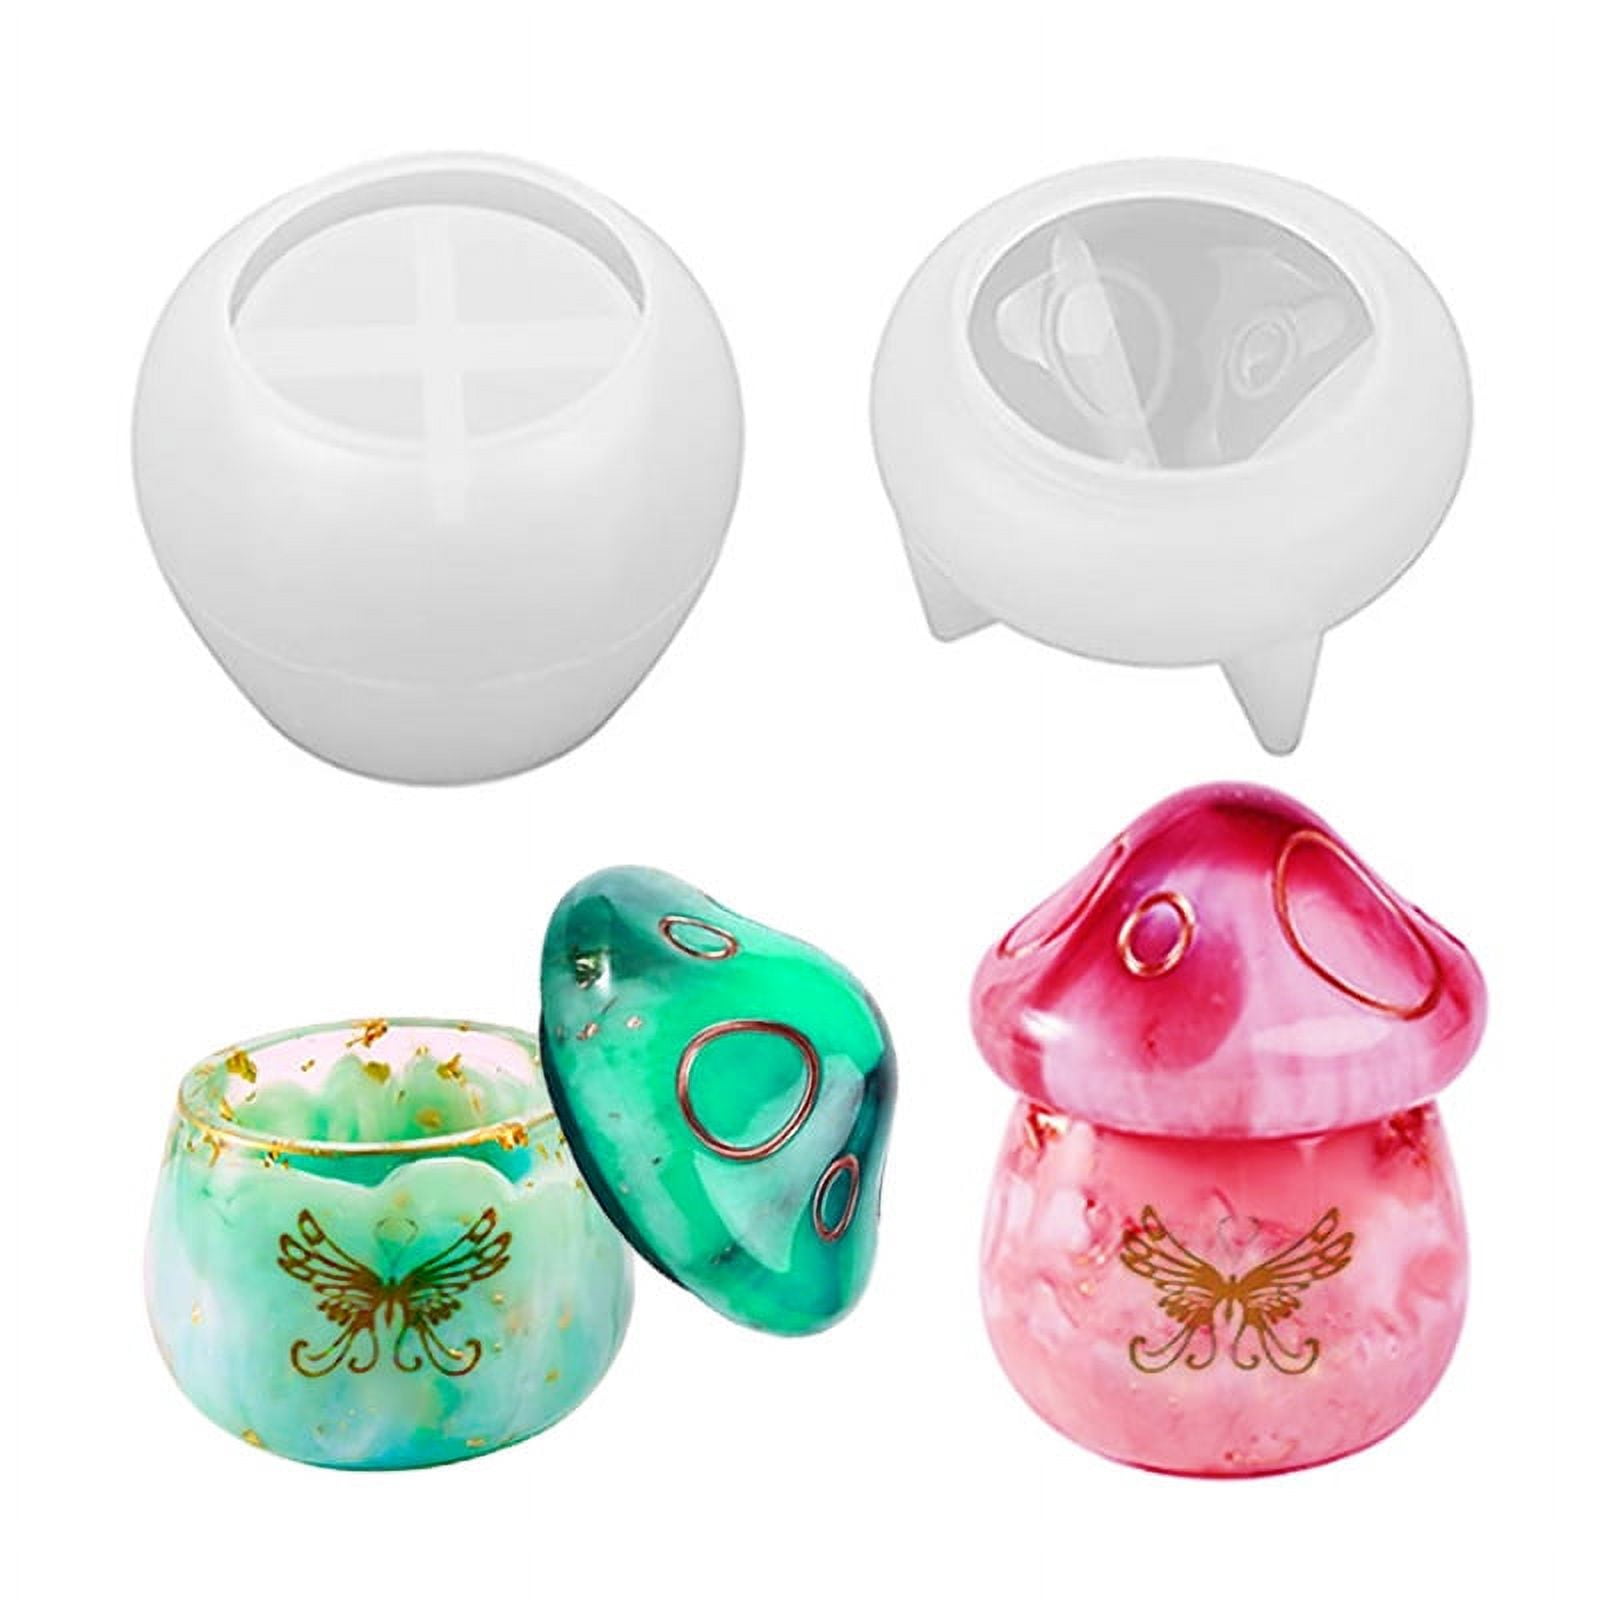 Jar & Mushroom Shaped Silicone Resin Molds With Cover, Epoxy Casting Mold  For Diy Jewelry Storage Box, Candy Container, Home Decoration